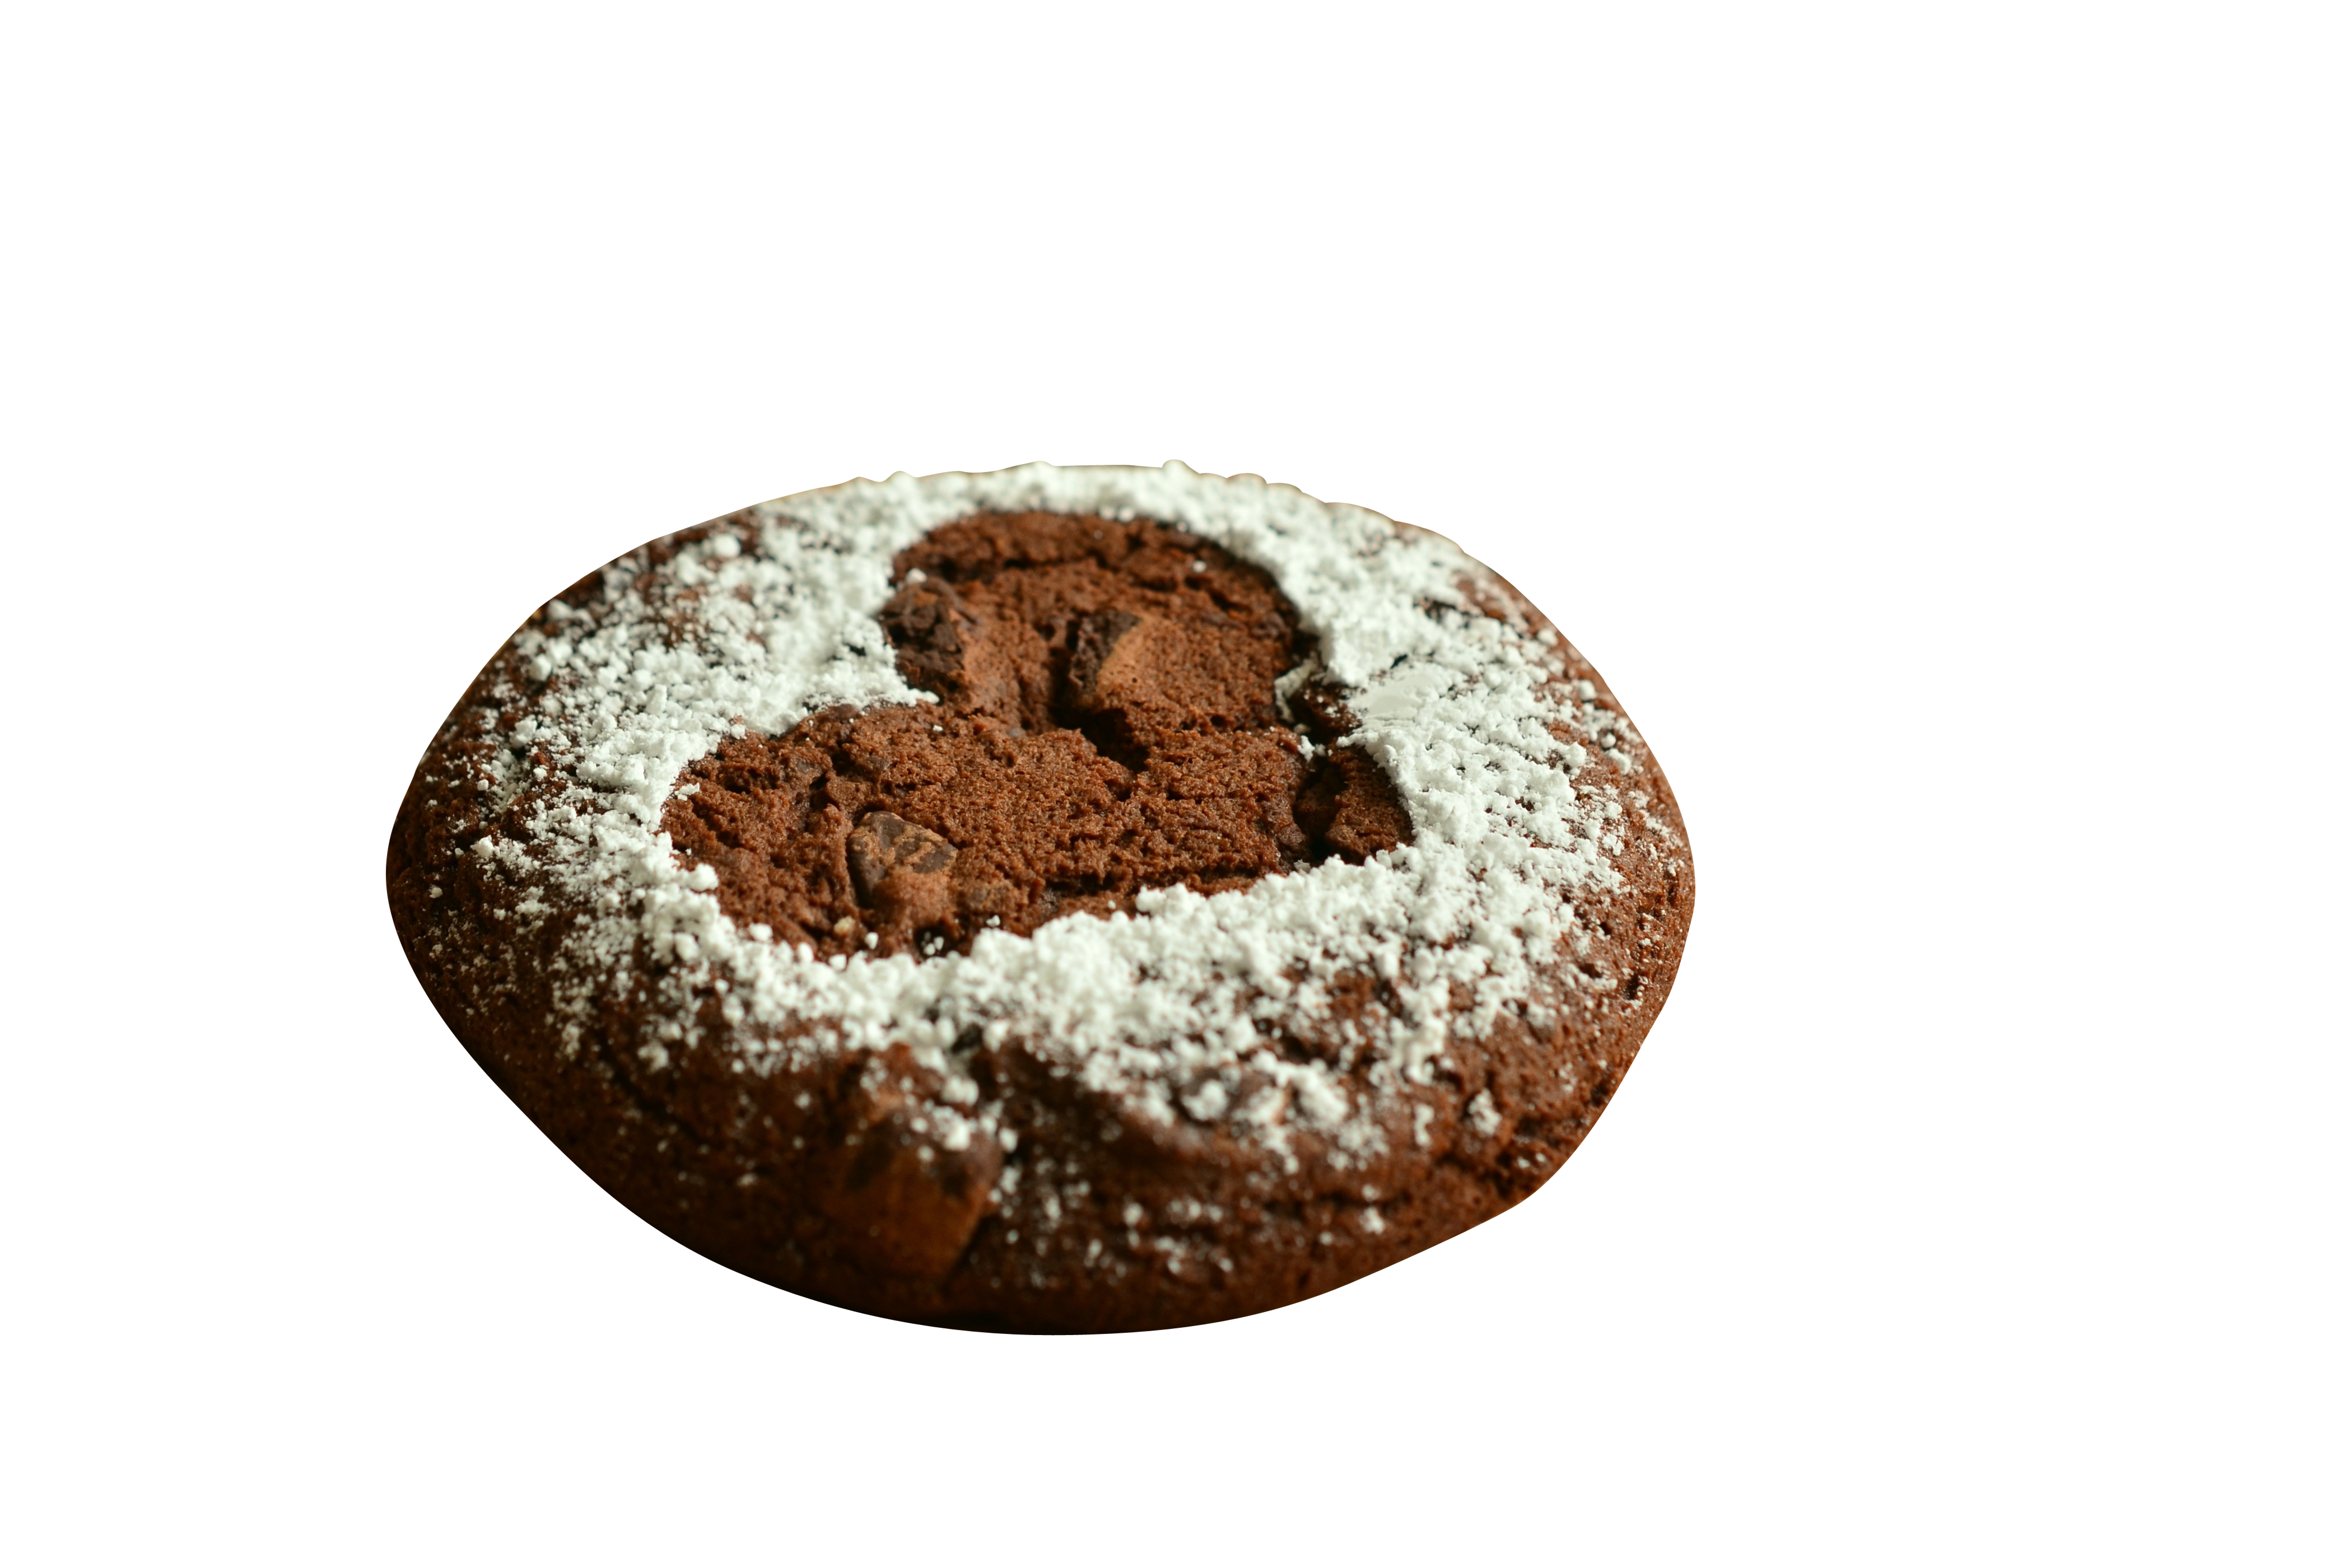 A Chocolate Cookie With A Heart Design On Top